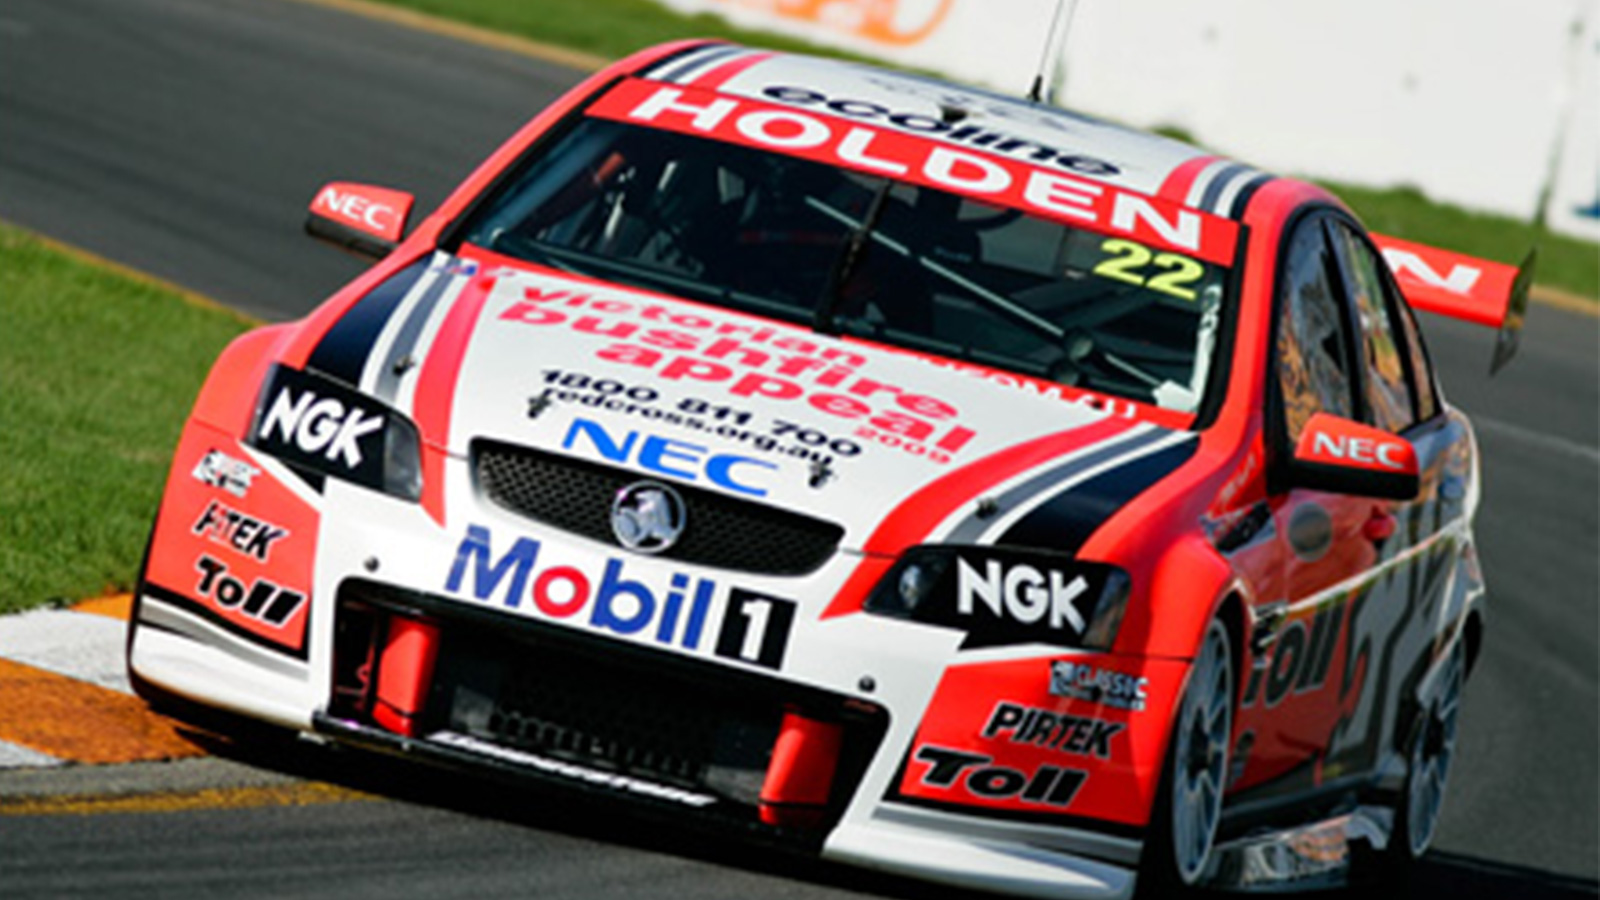 Toll Holden Racing Team commemorative bonnets up for grabs